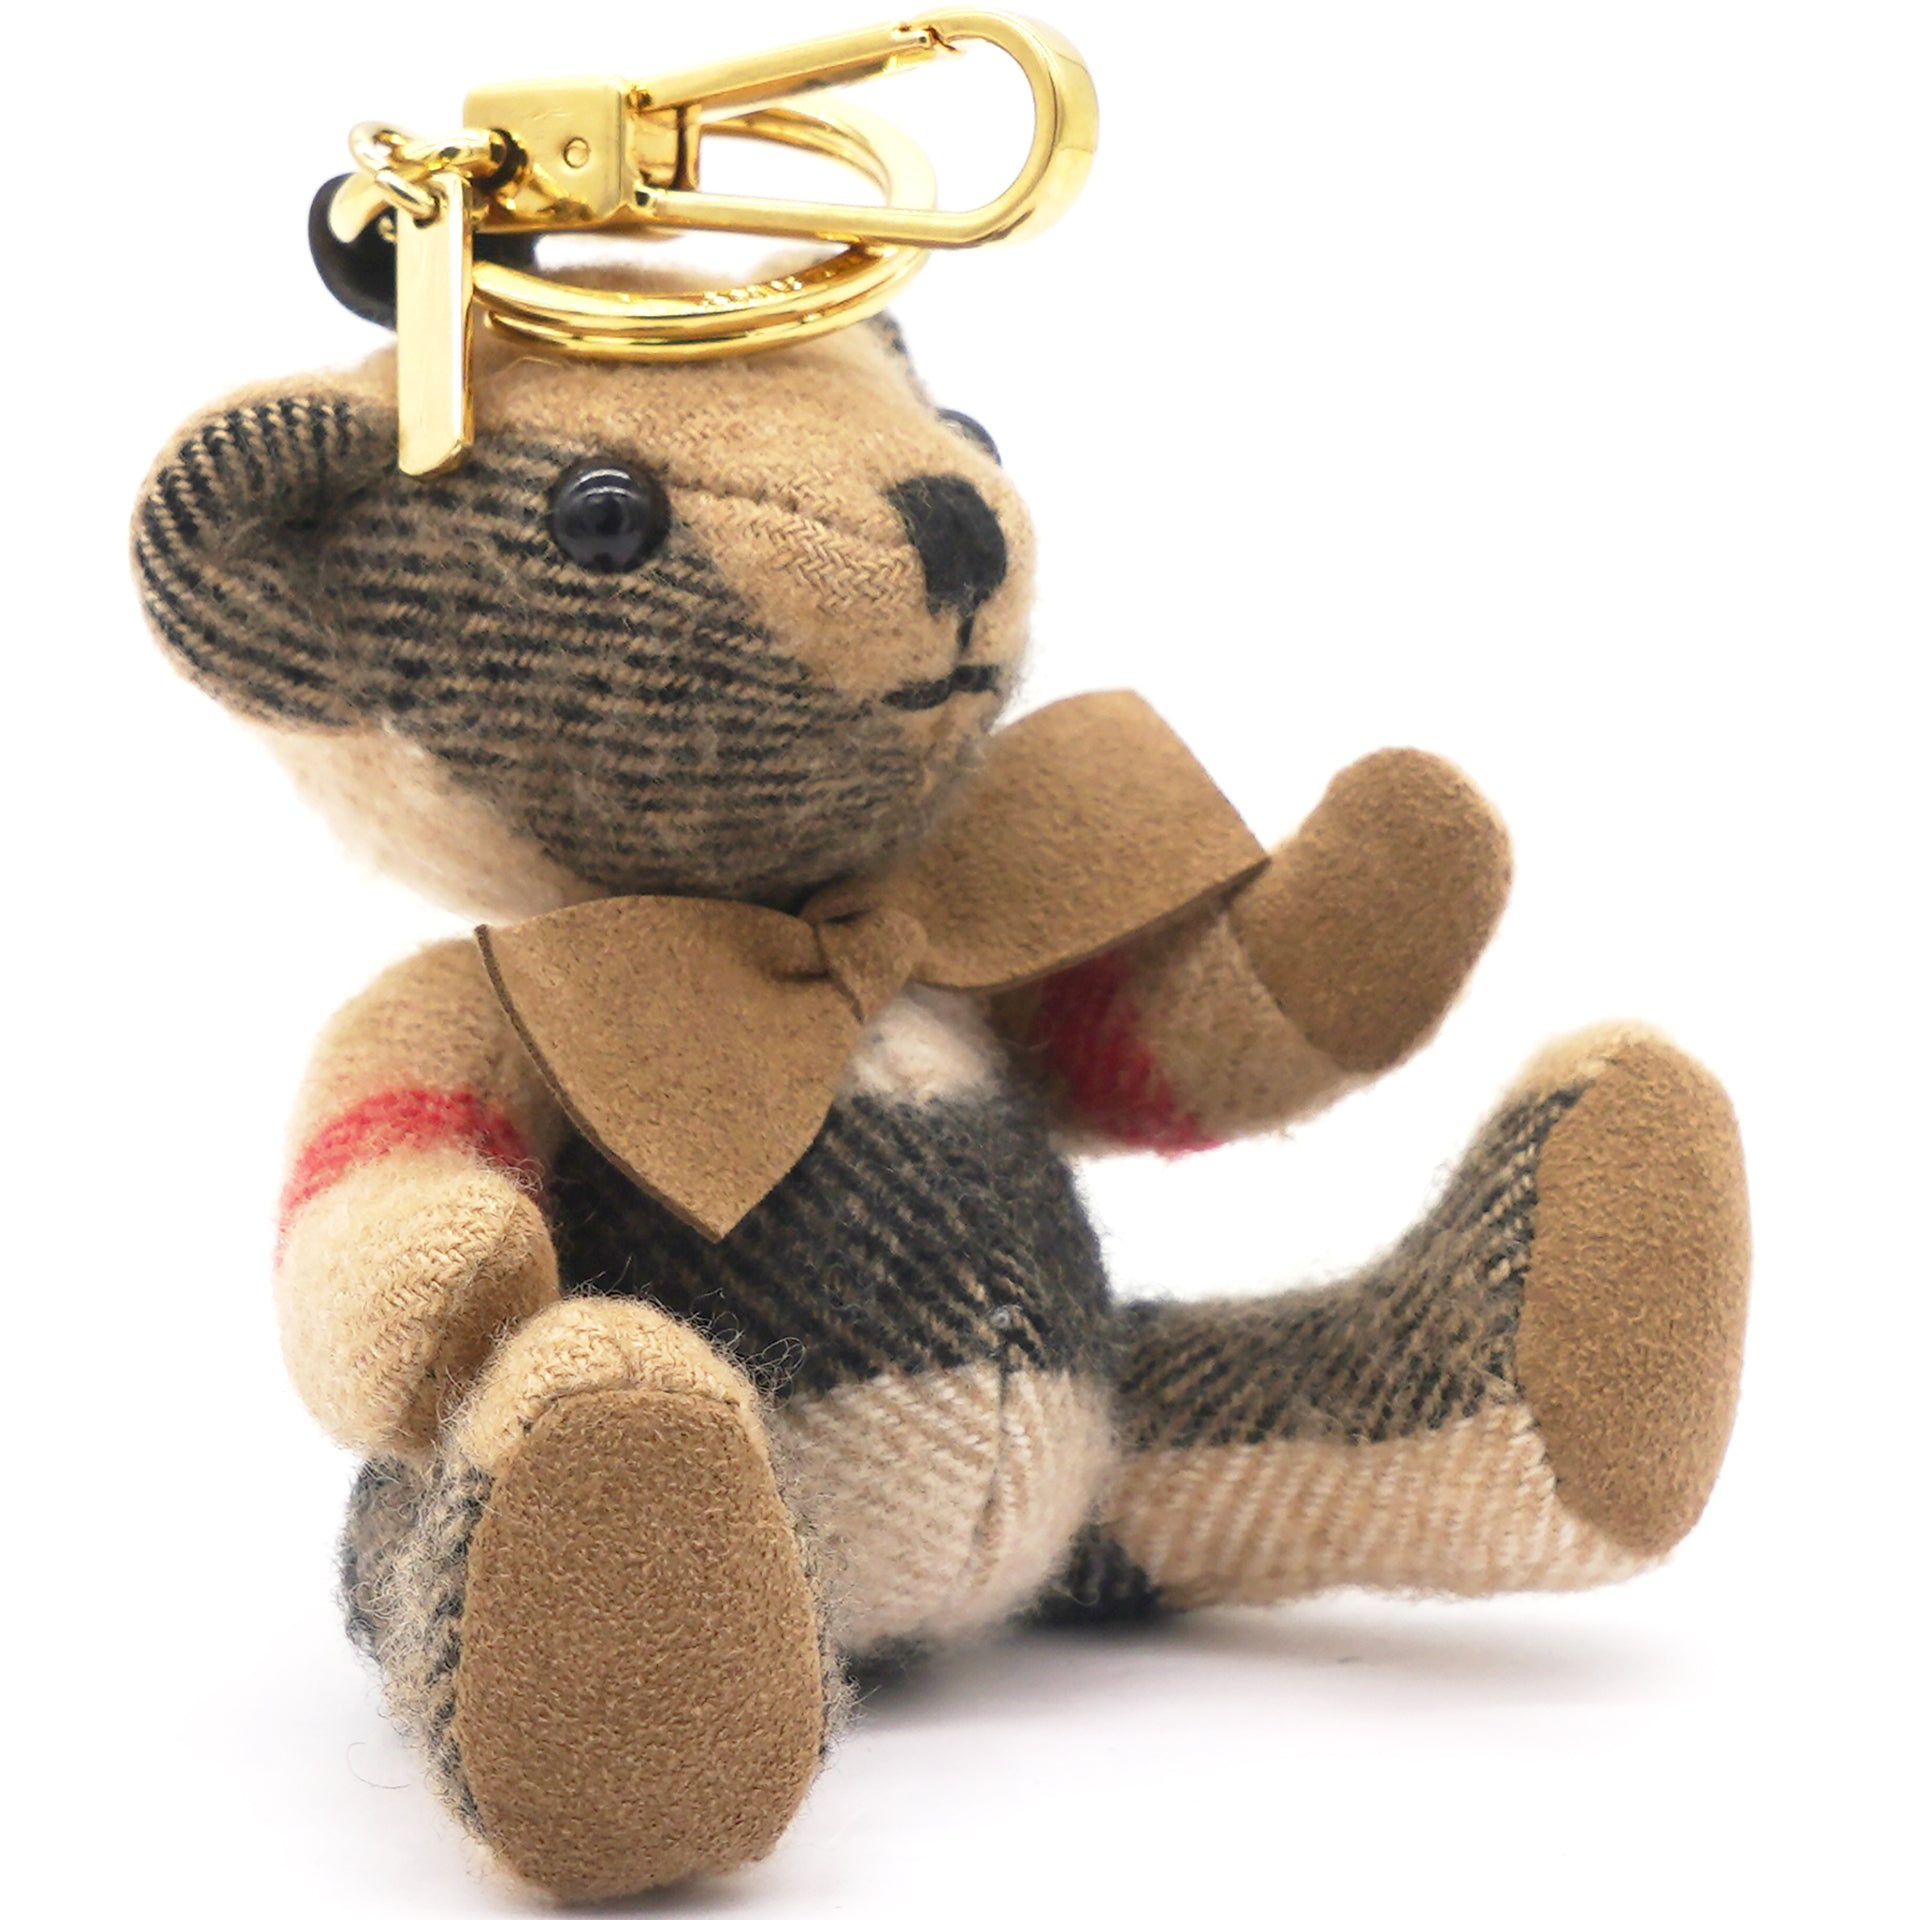 BURBERRY: Thomas Bear keyring with bow tie - Beige